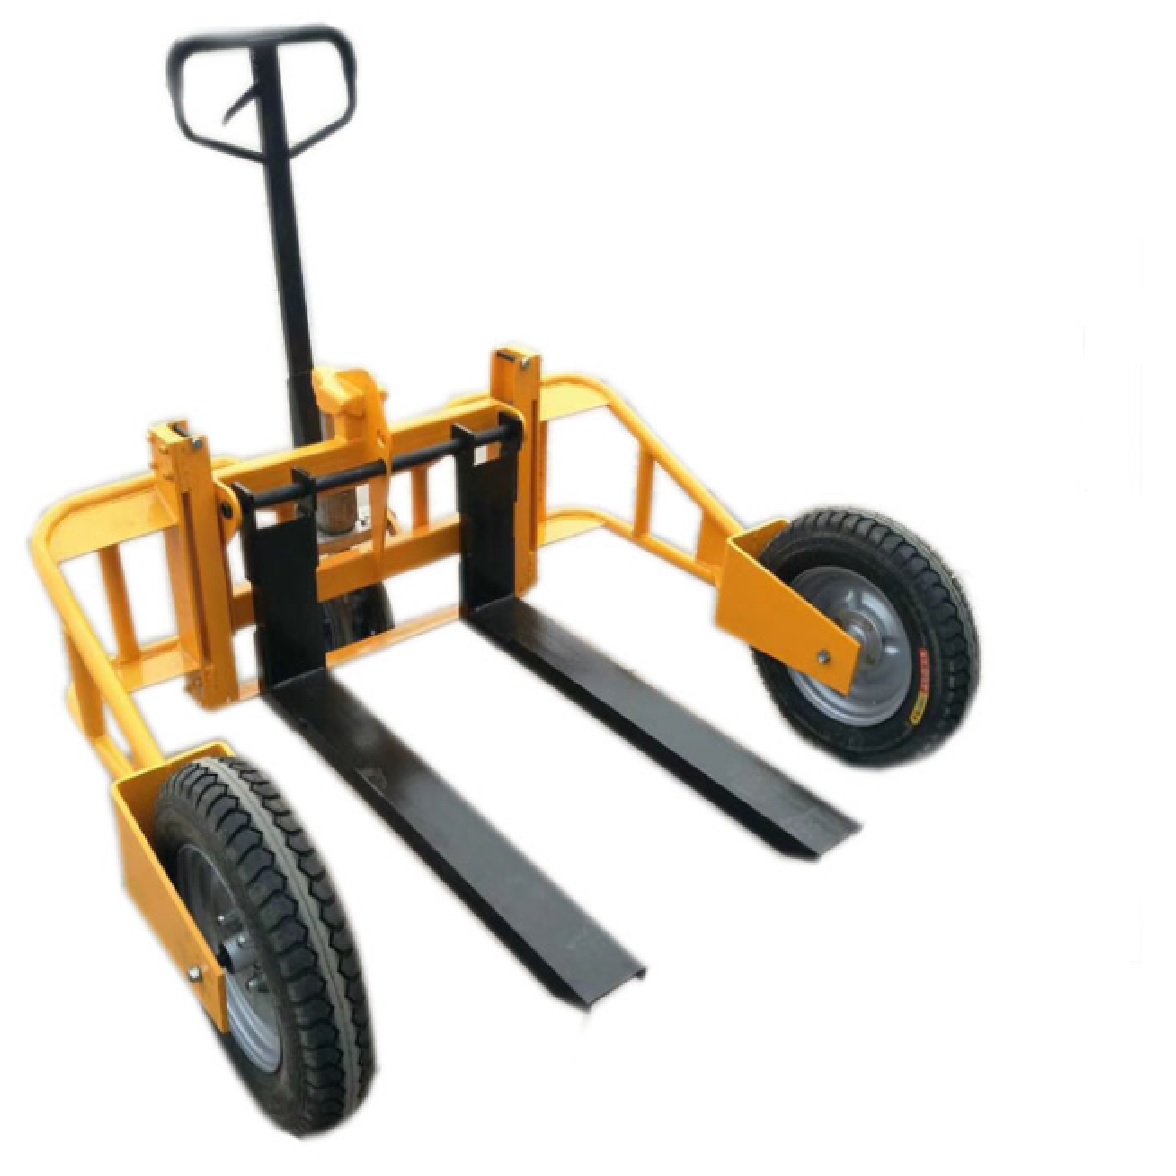 Stocky RP-1250A Pallet Truck For Construction Site 1 TON